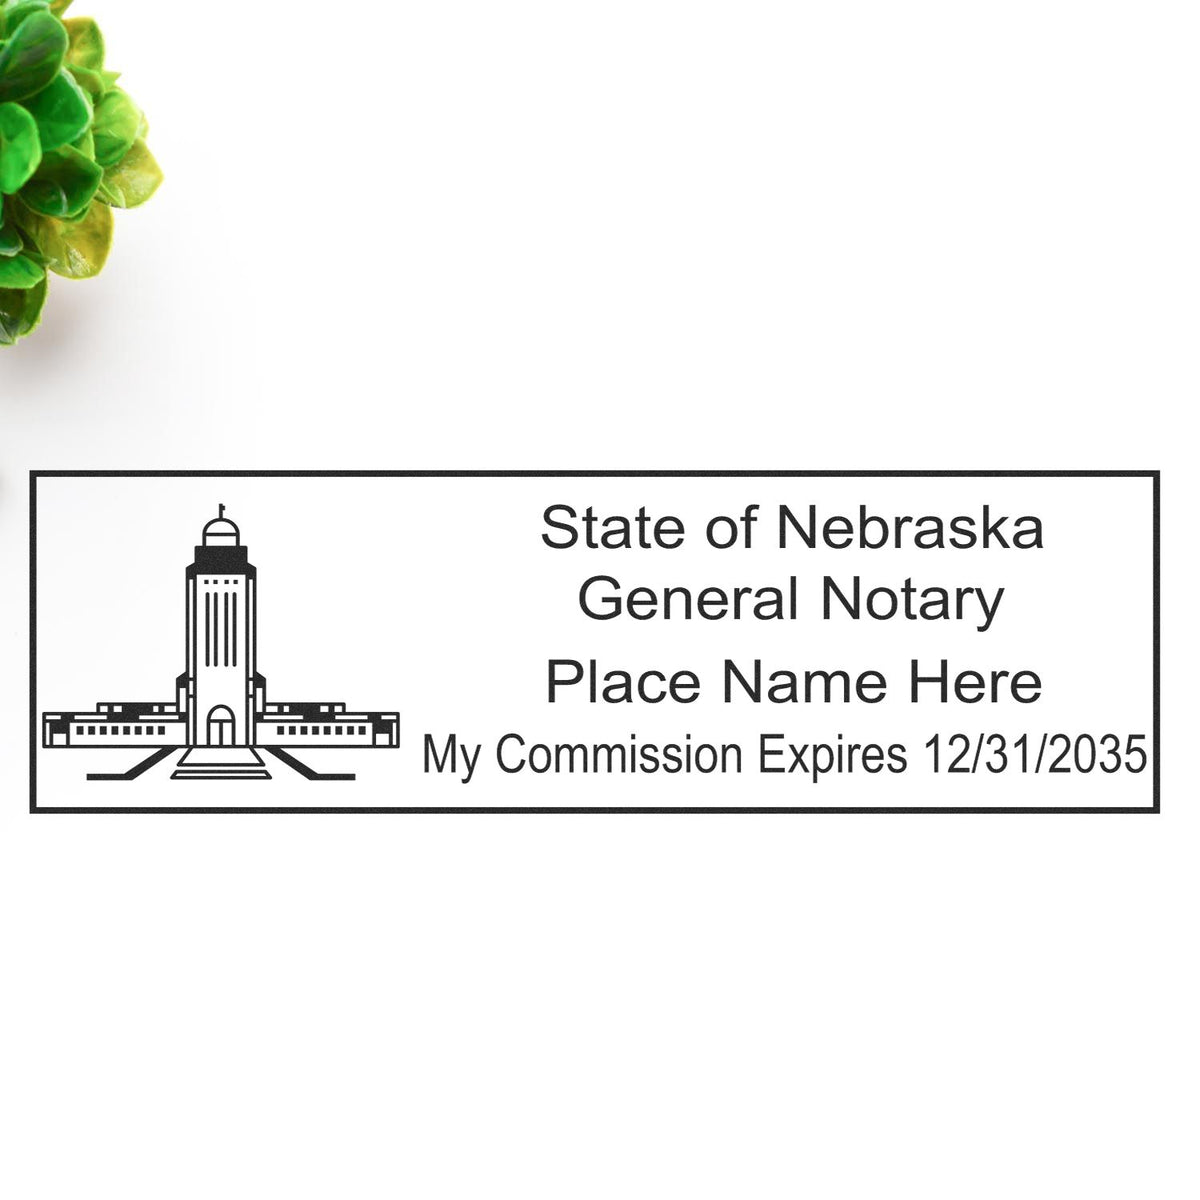 Another Example of a stamped impression of the Self-Inking State Seal Nebraska Notary Stamp on a piece of office paper.